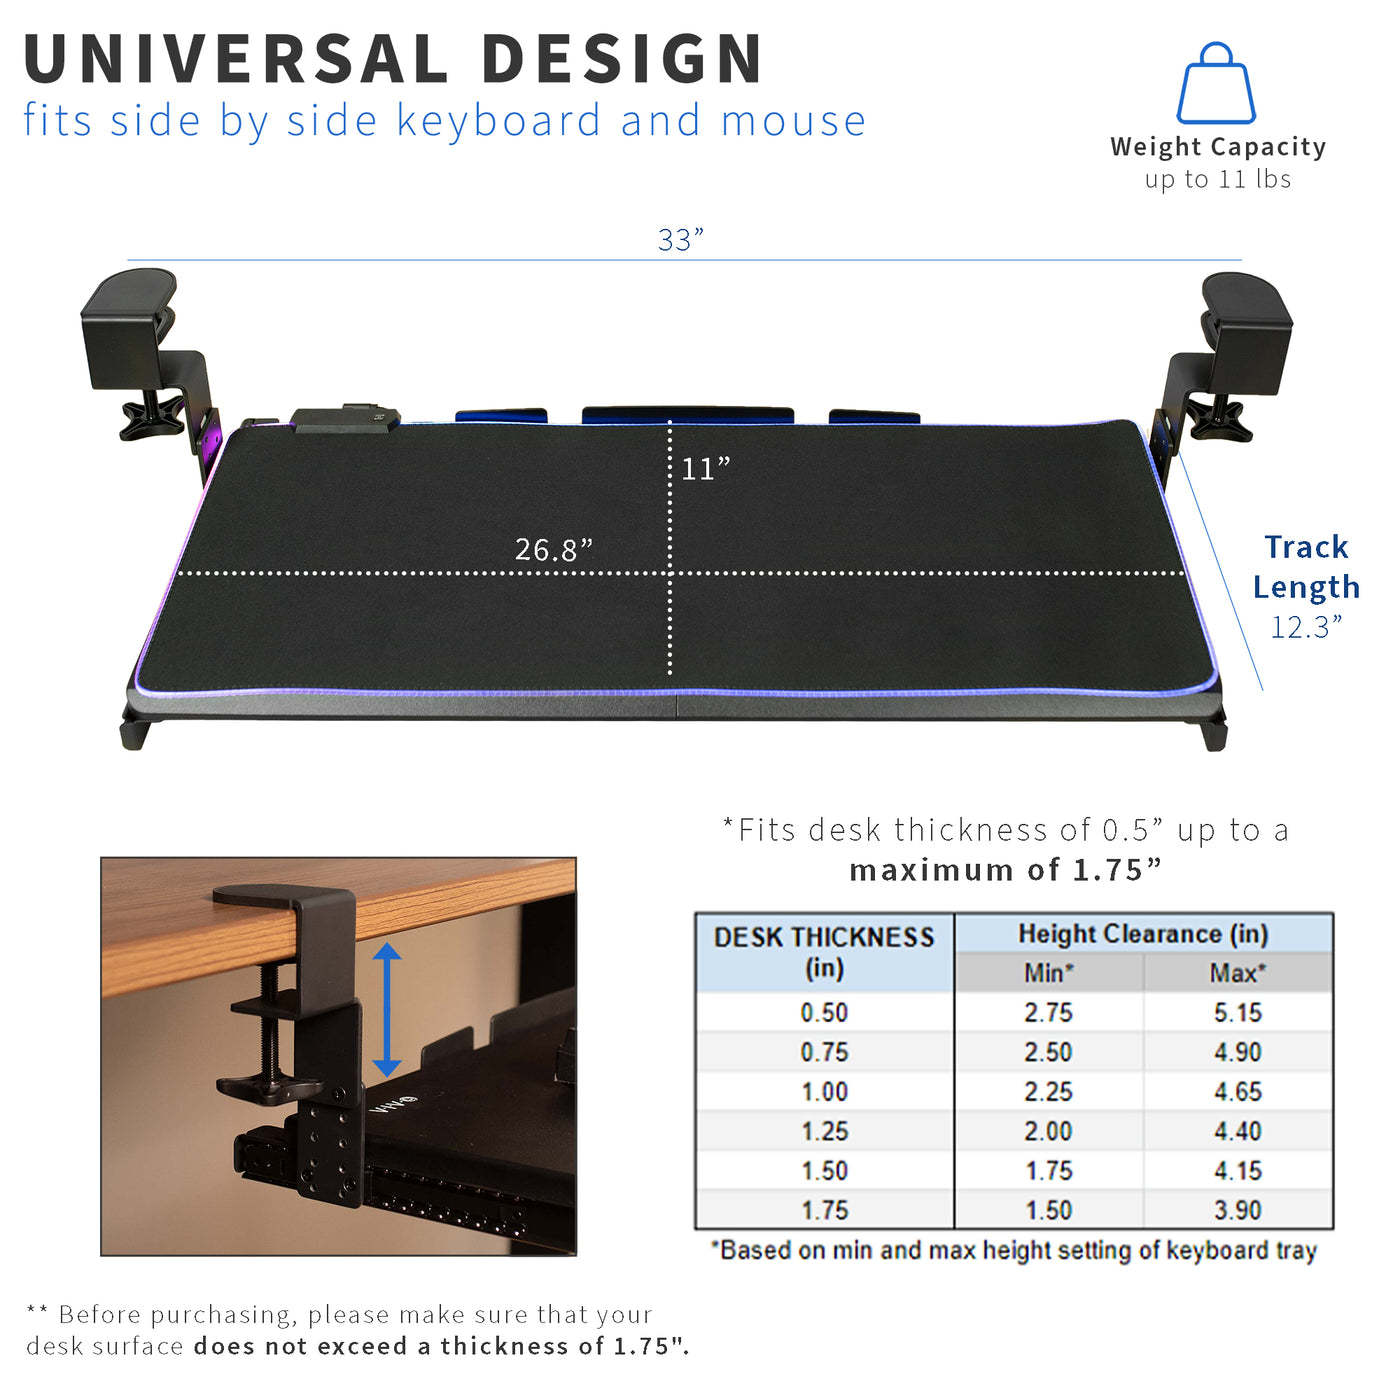 Clamp-on height adjustable pullout keyboard tray attachment with universal design.